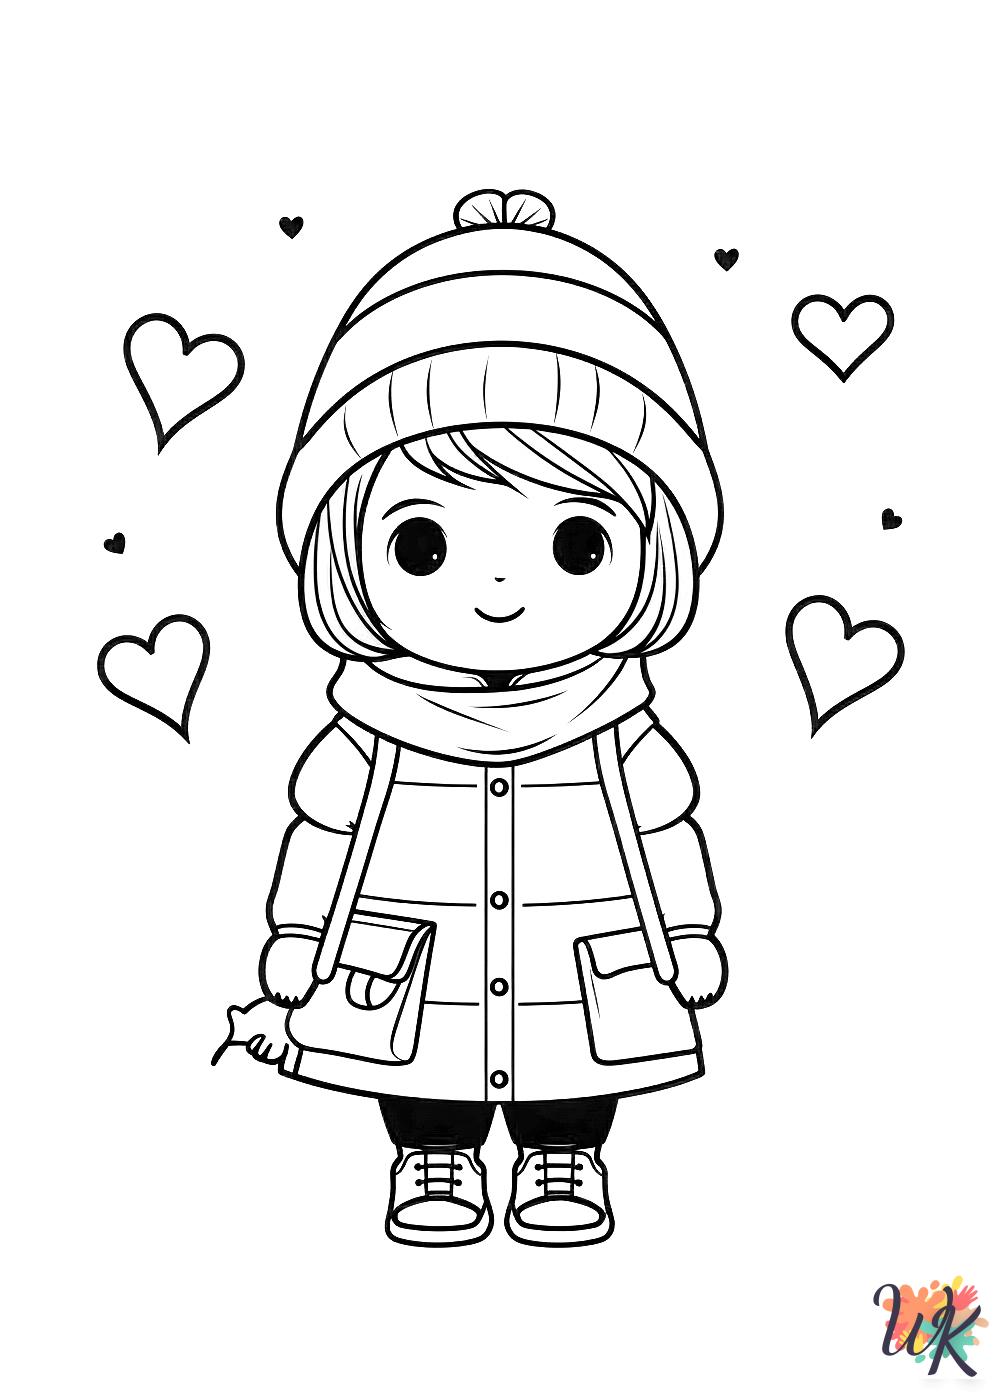 February coloring pages for kids